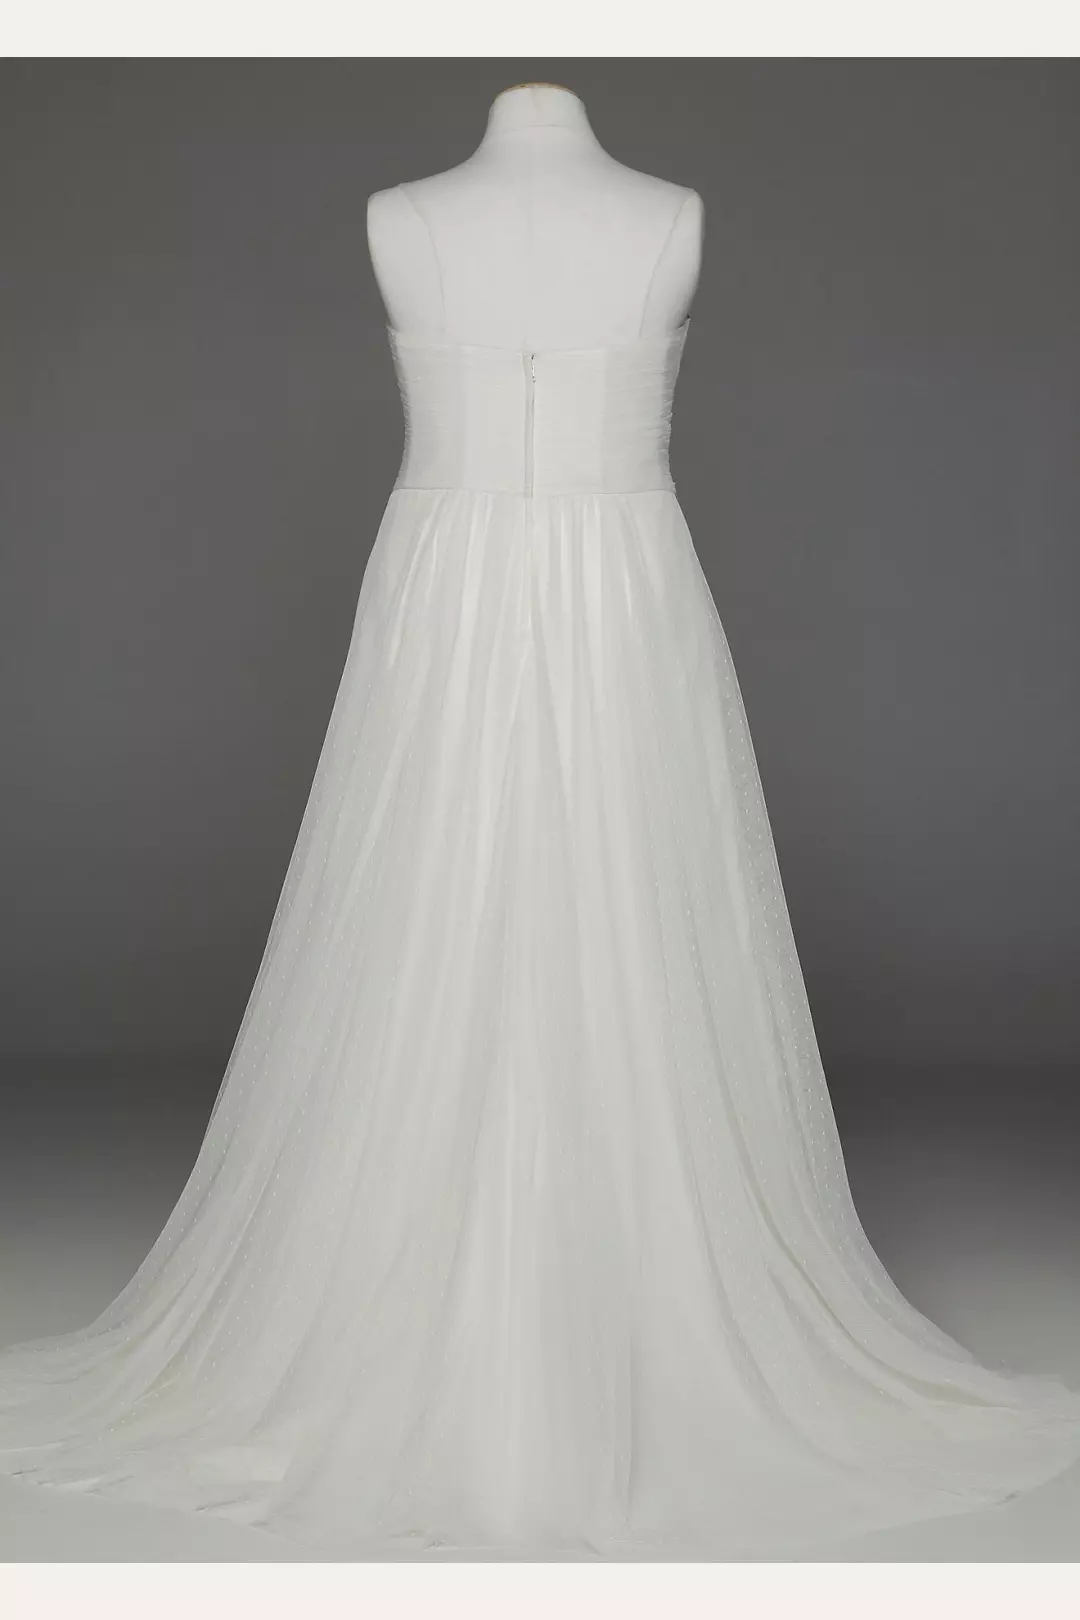 Dot Tulle Empire Waist Soft Wedding Gown Image 2